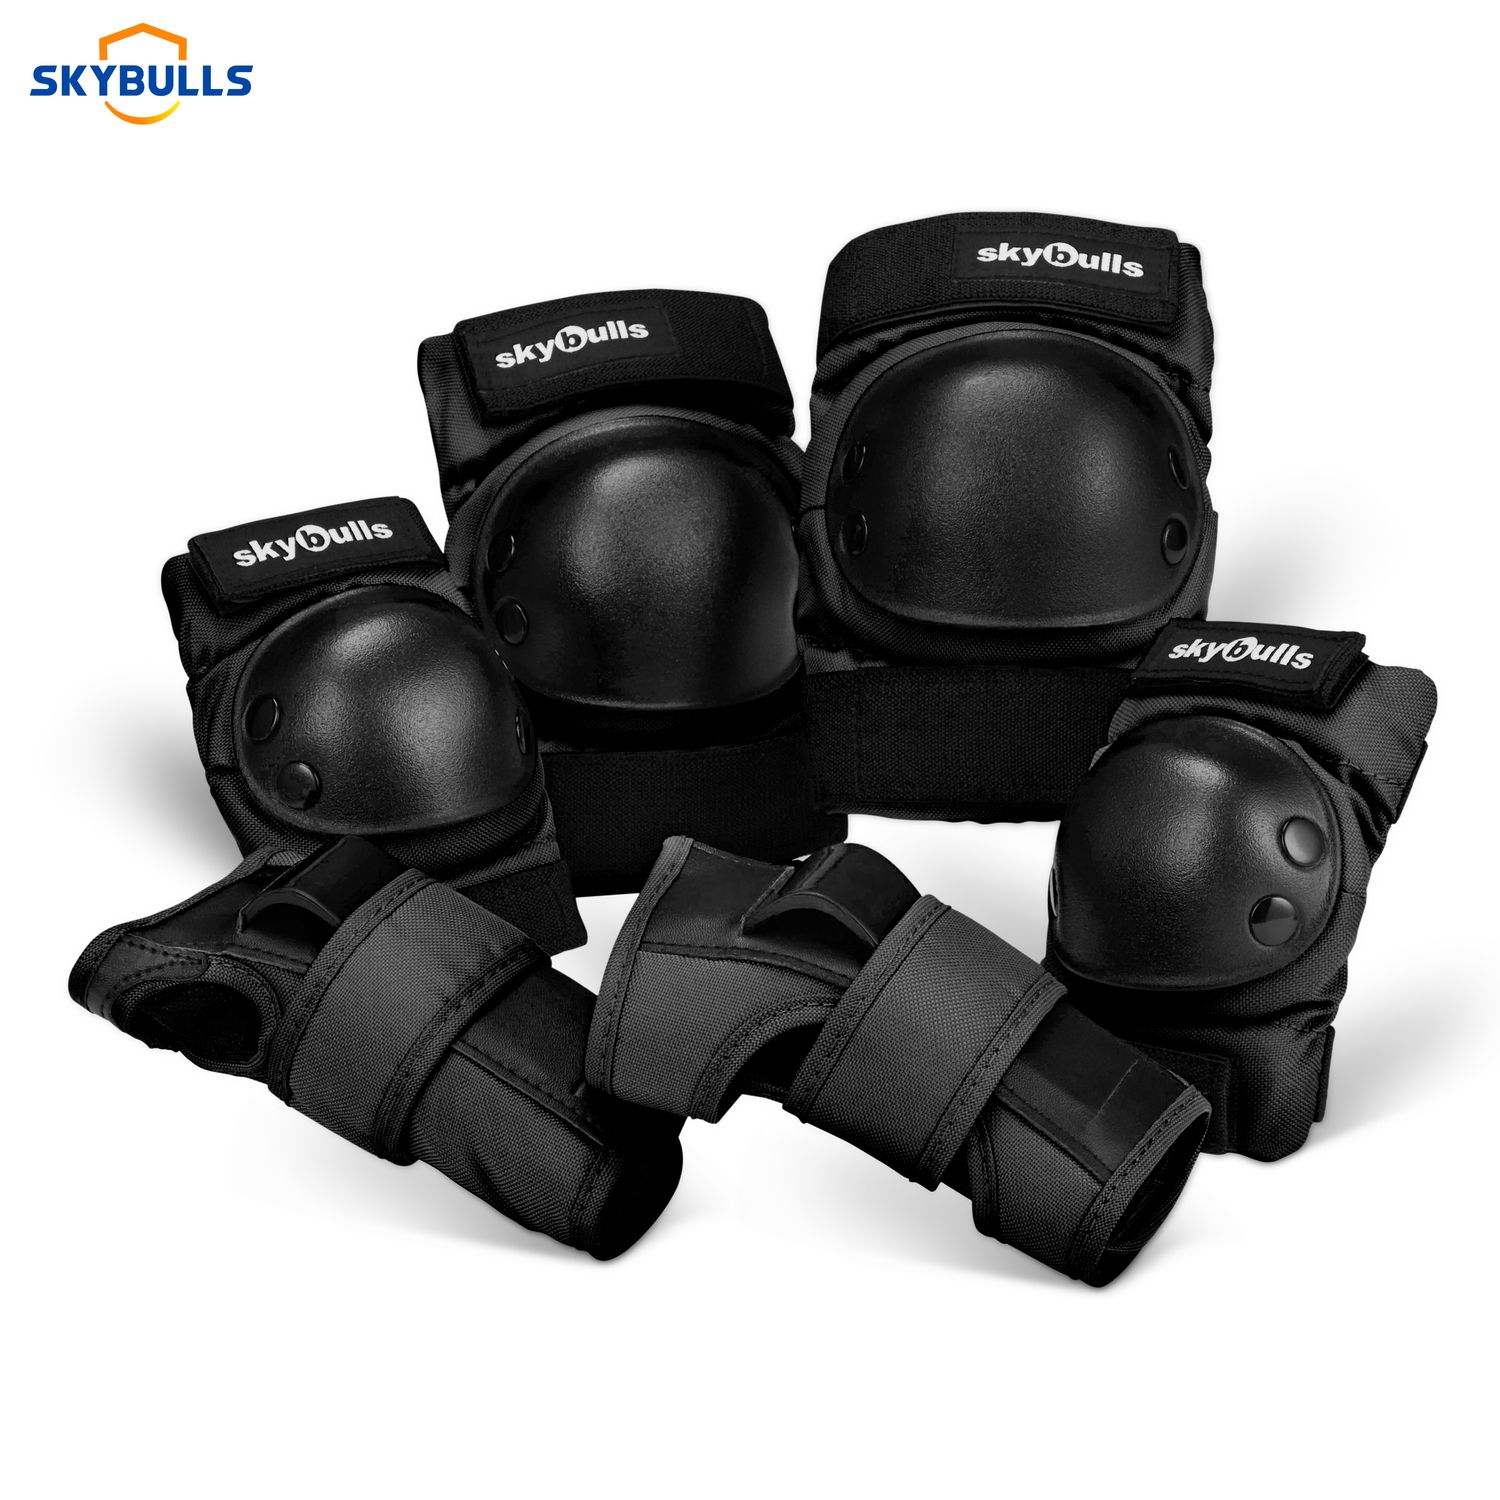 Child Knee Pads Elbow Pads with Wrist Guards 3 in 1 for Boys and Girls Cycling Inline Roller Skating Biking SKYBULLS Kids/Toddler Protective Gear Set 